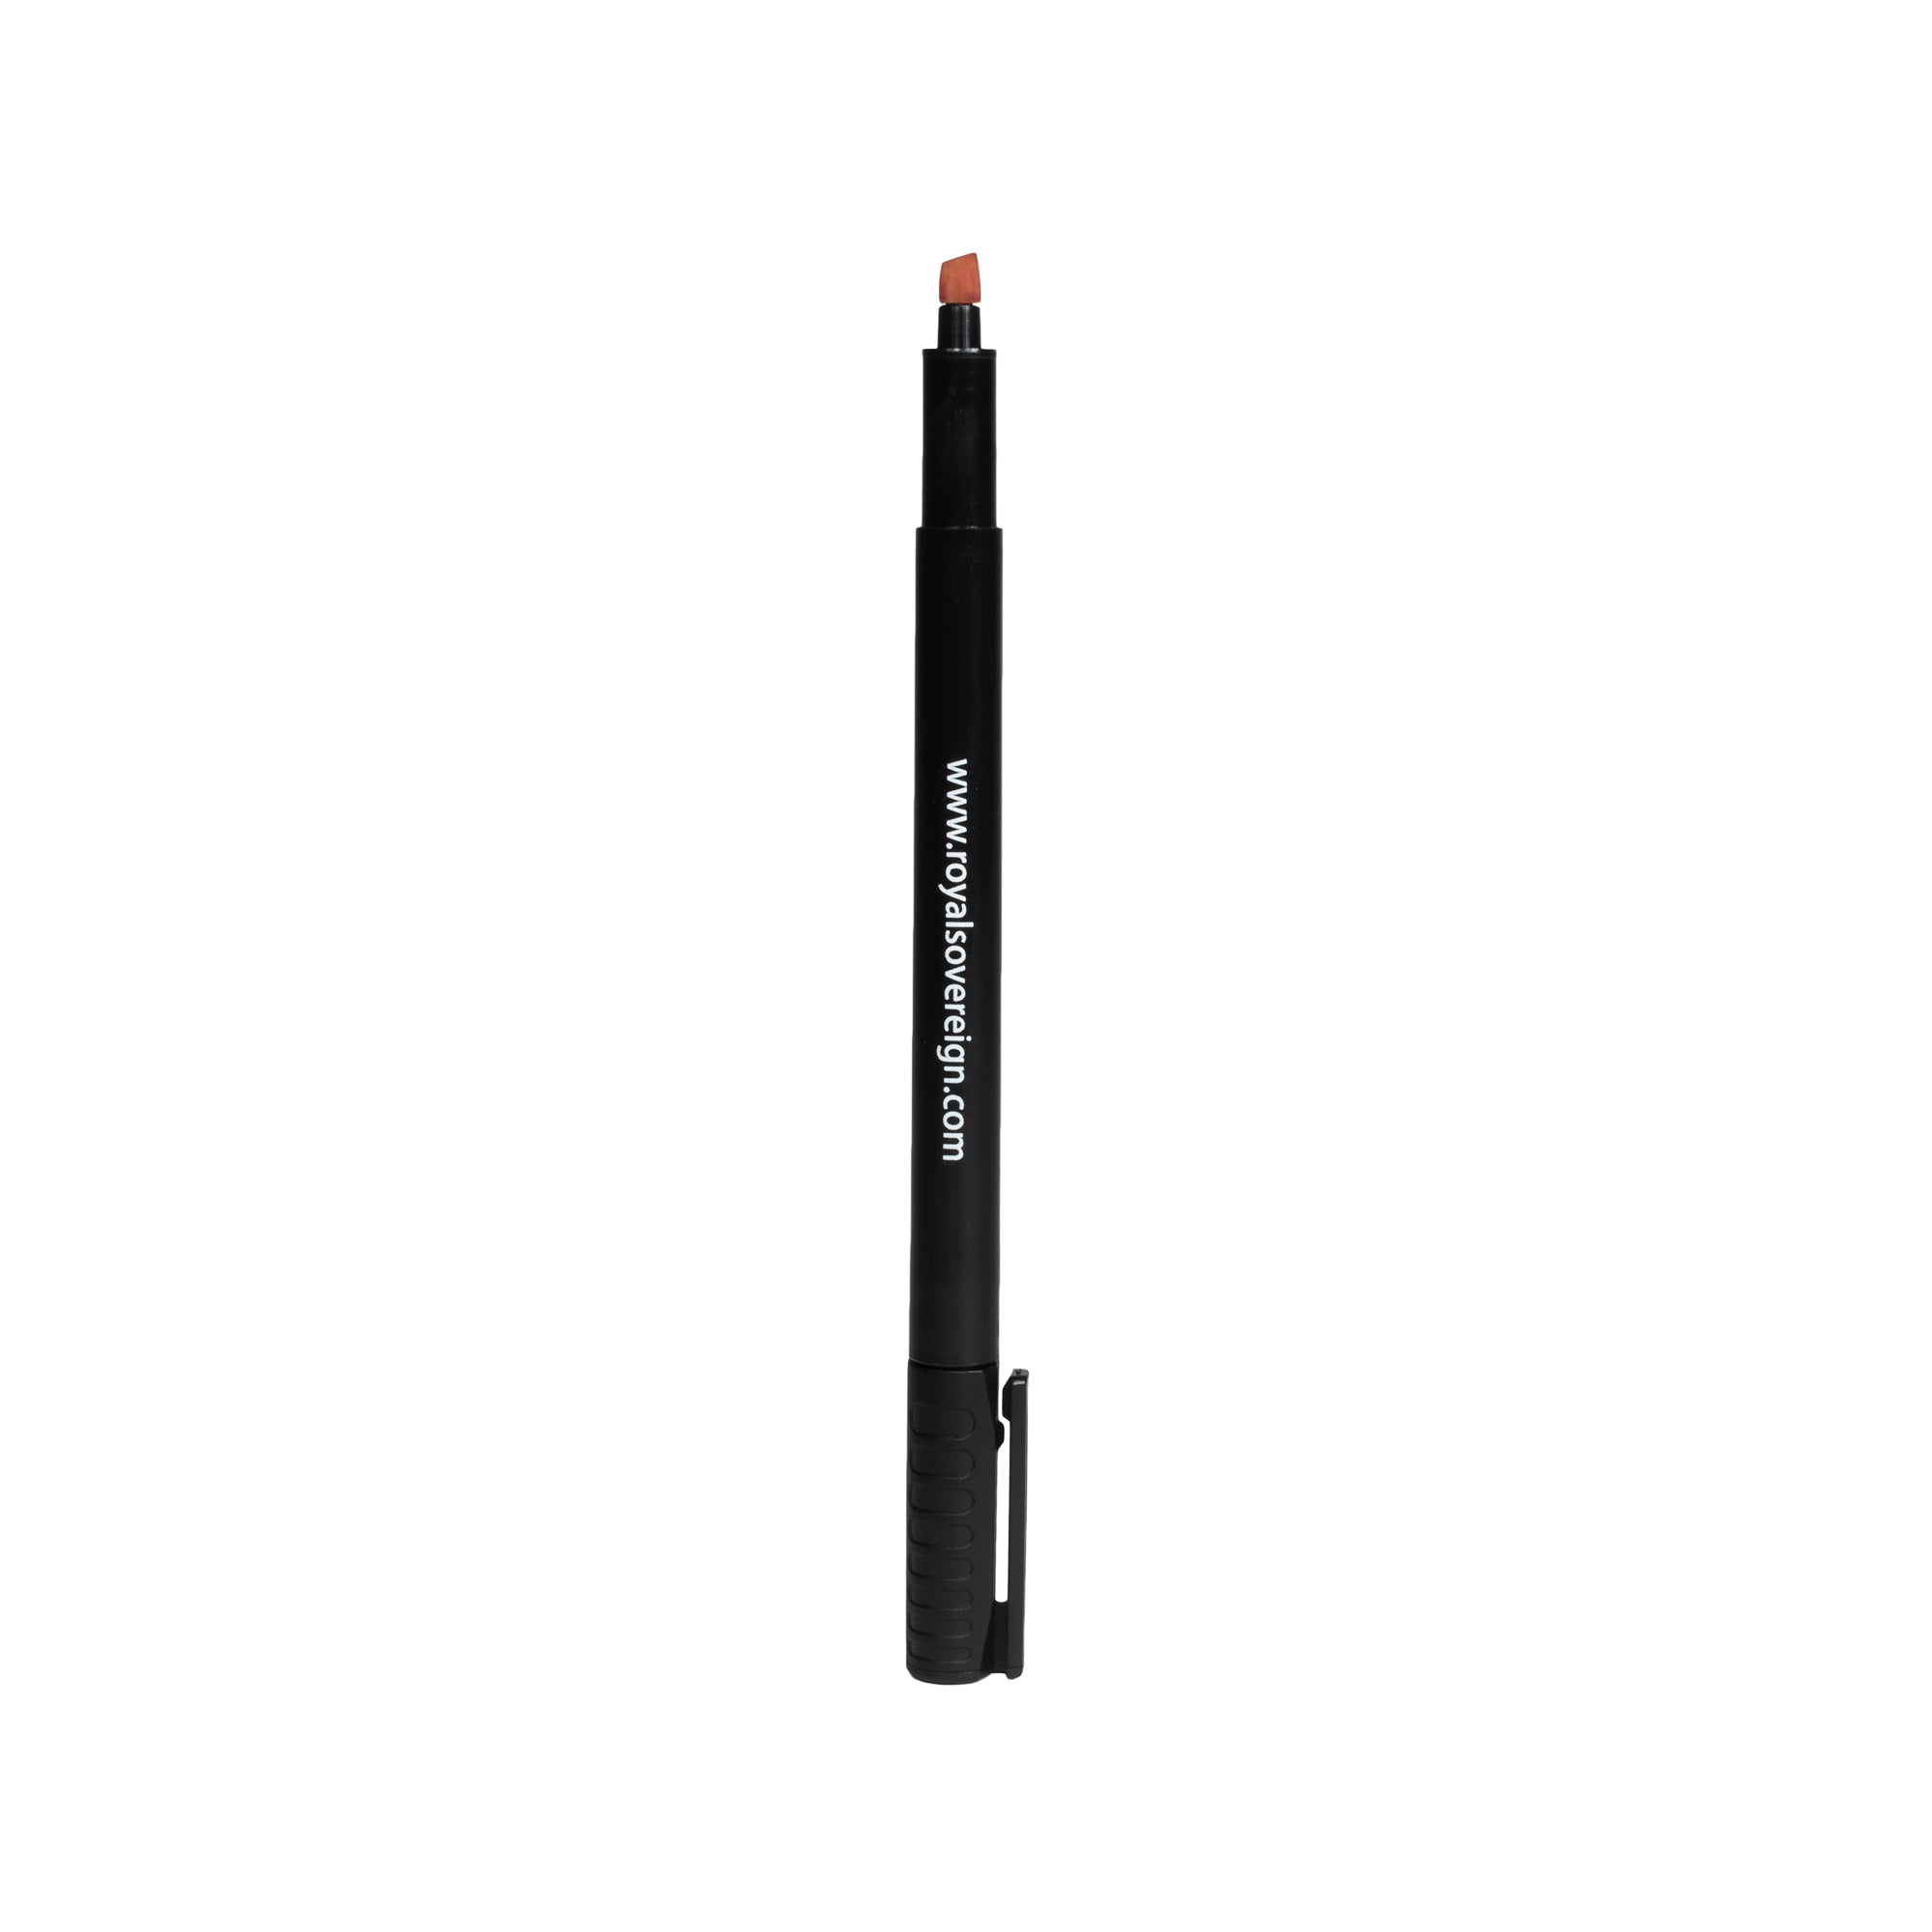 RCD-0112-ADBK, Counterfeit Detection Pens, 12 Pack